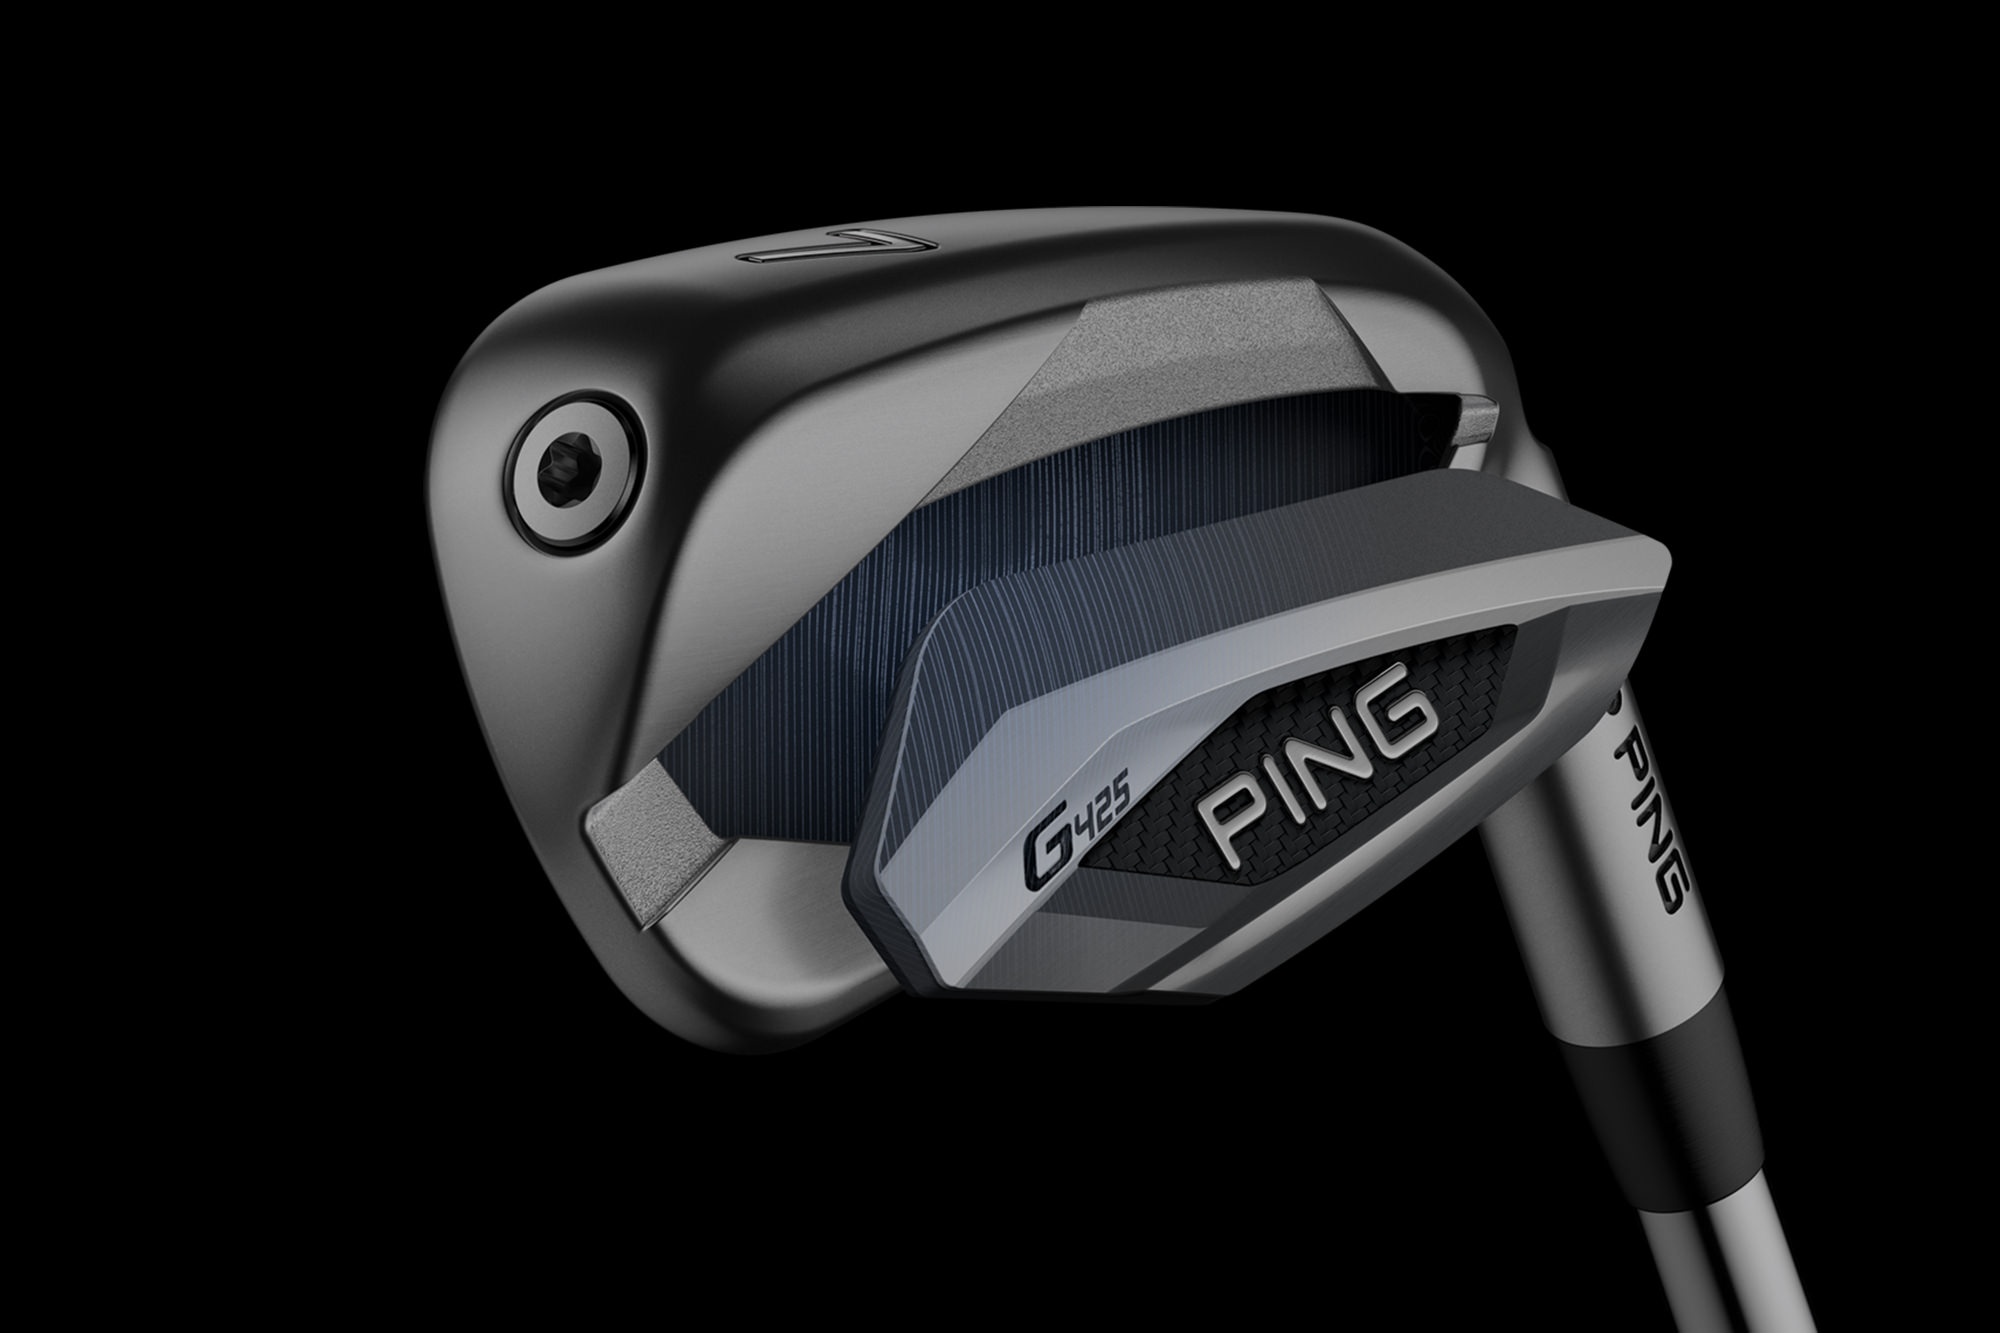 Ping G425 irons review: Their most forgiving to date?